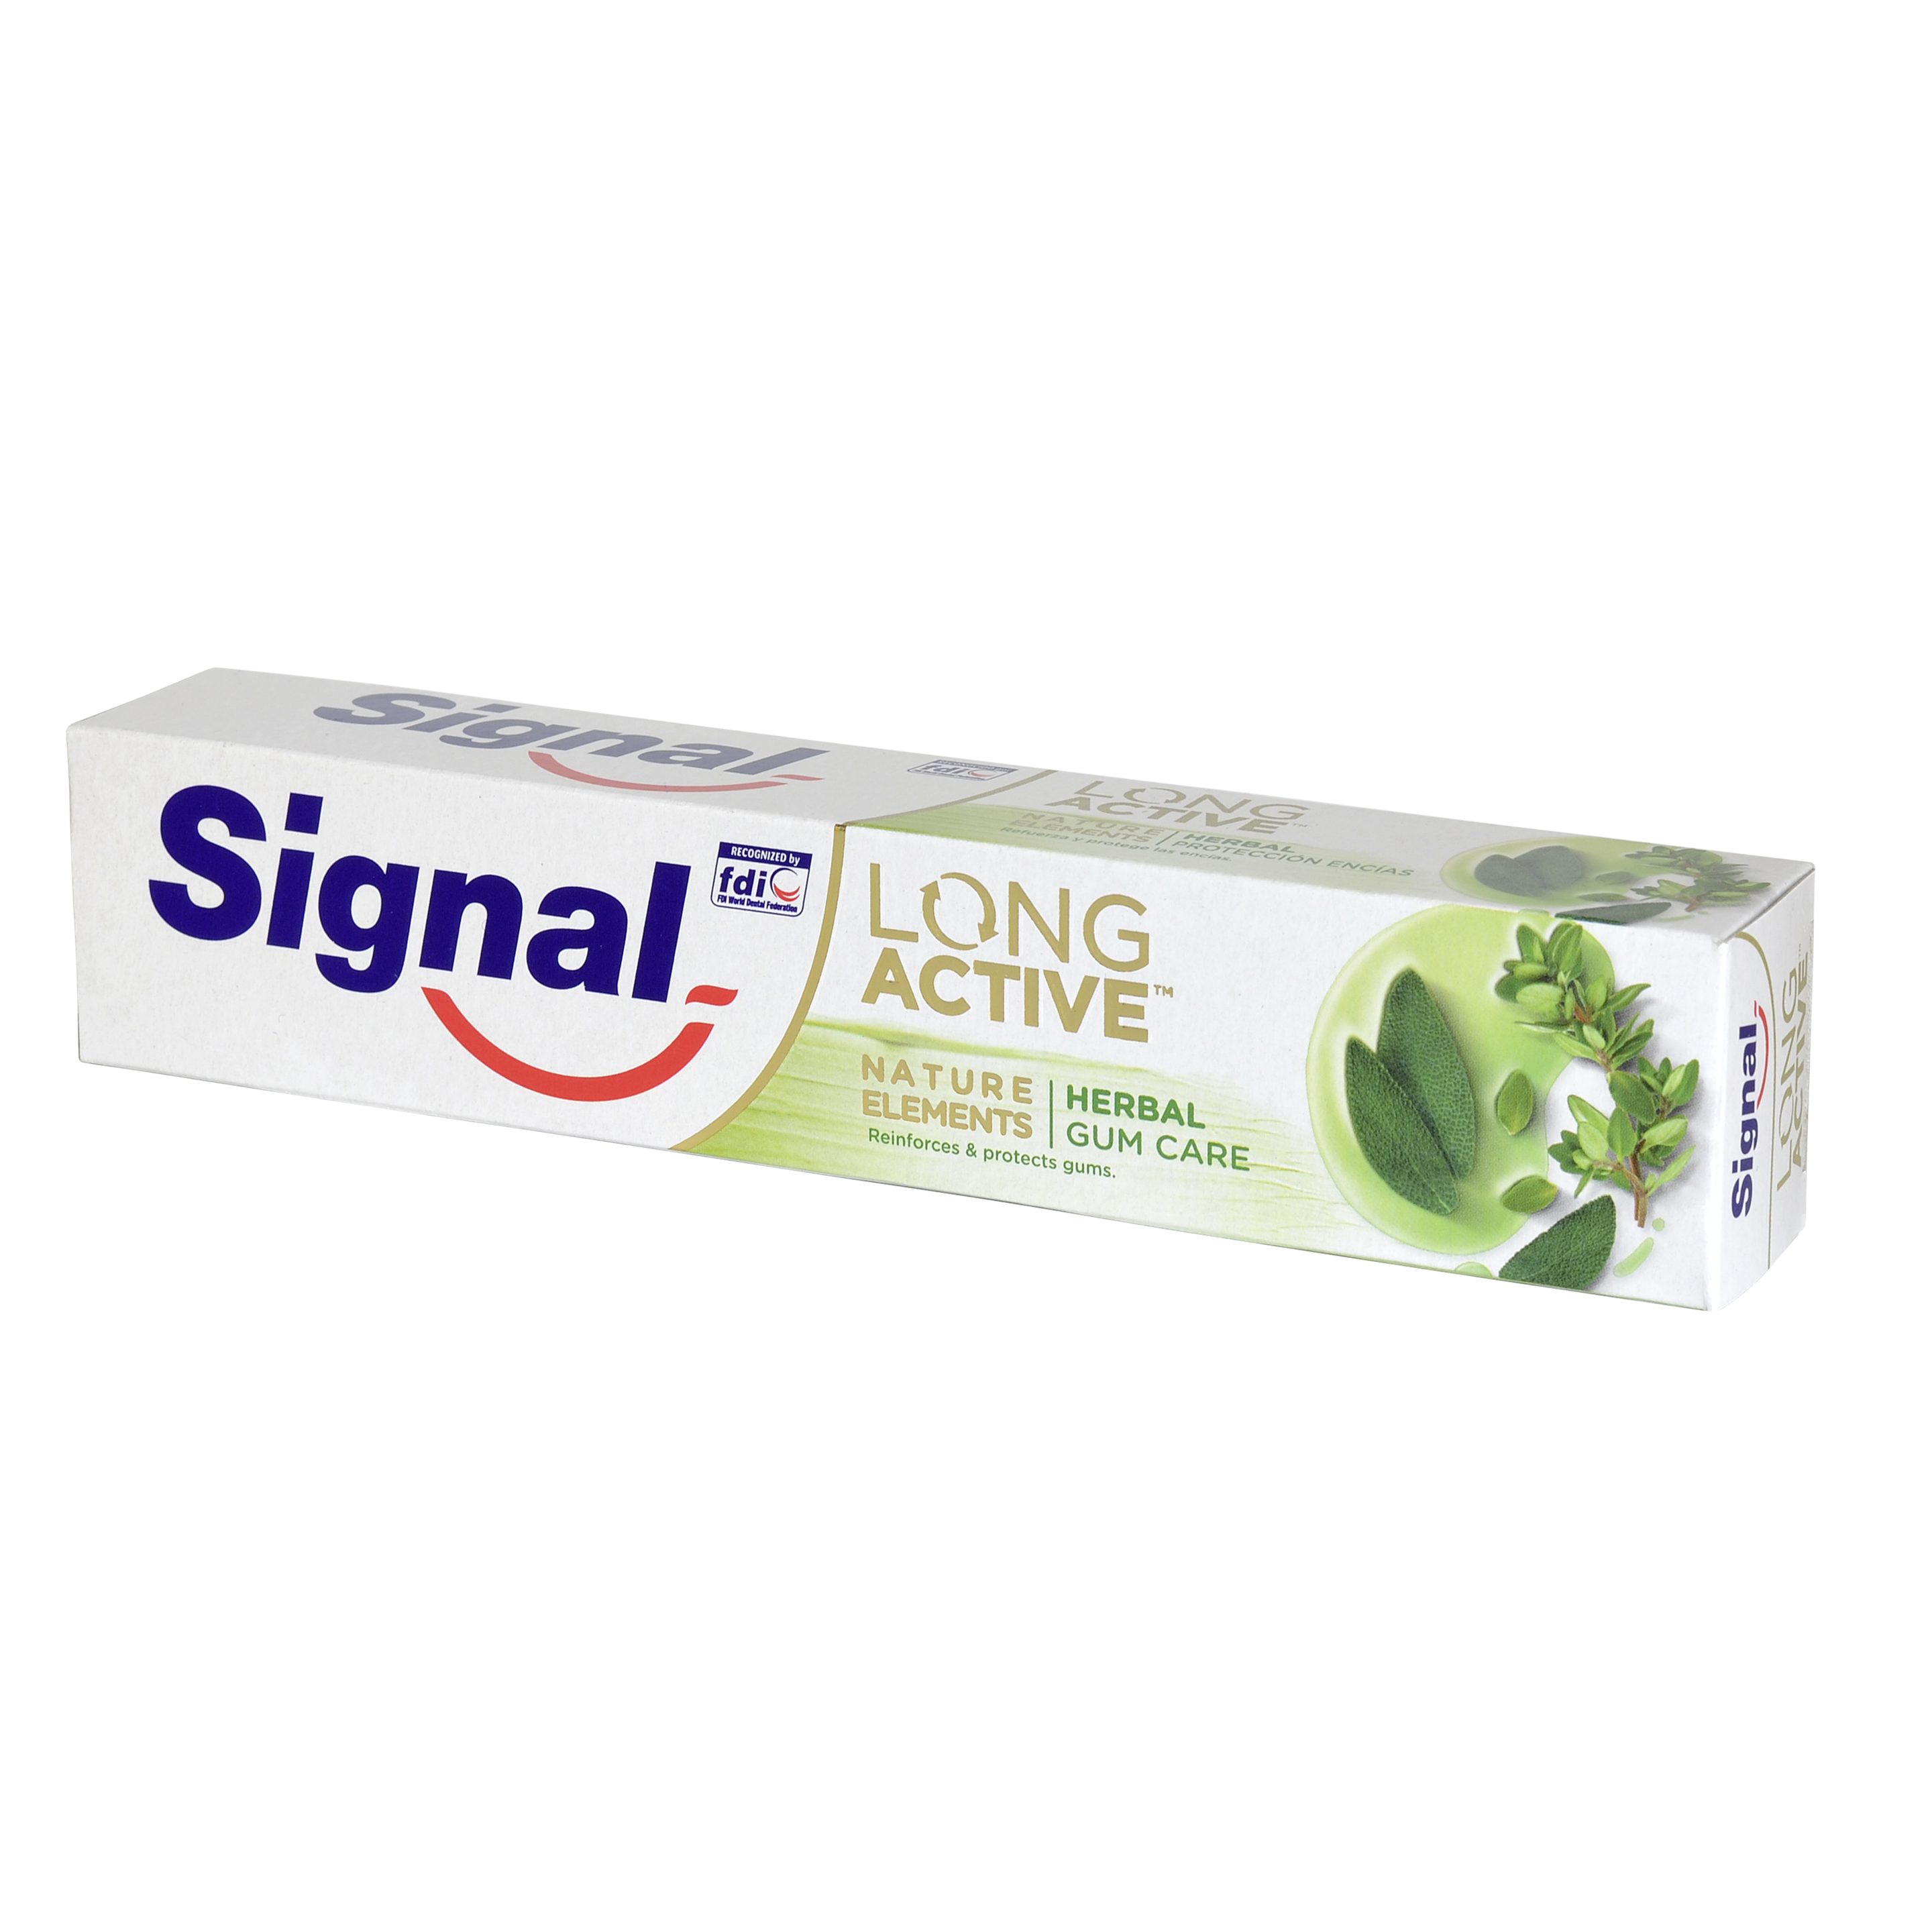 Signal zubná pasta Long Active Nature Elements Herbal Gum Care 75ml